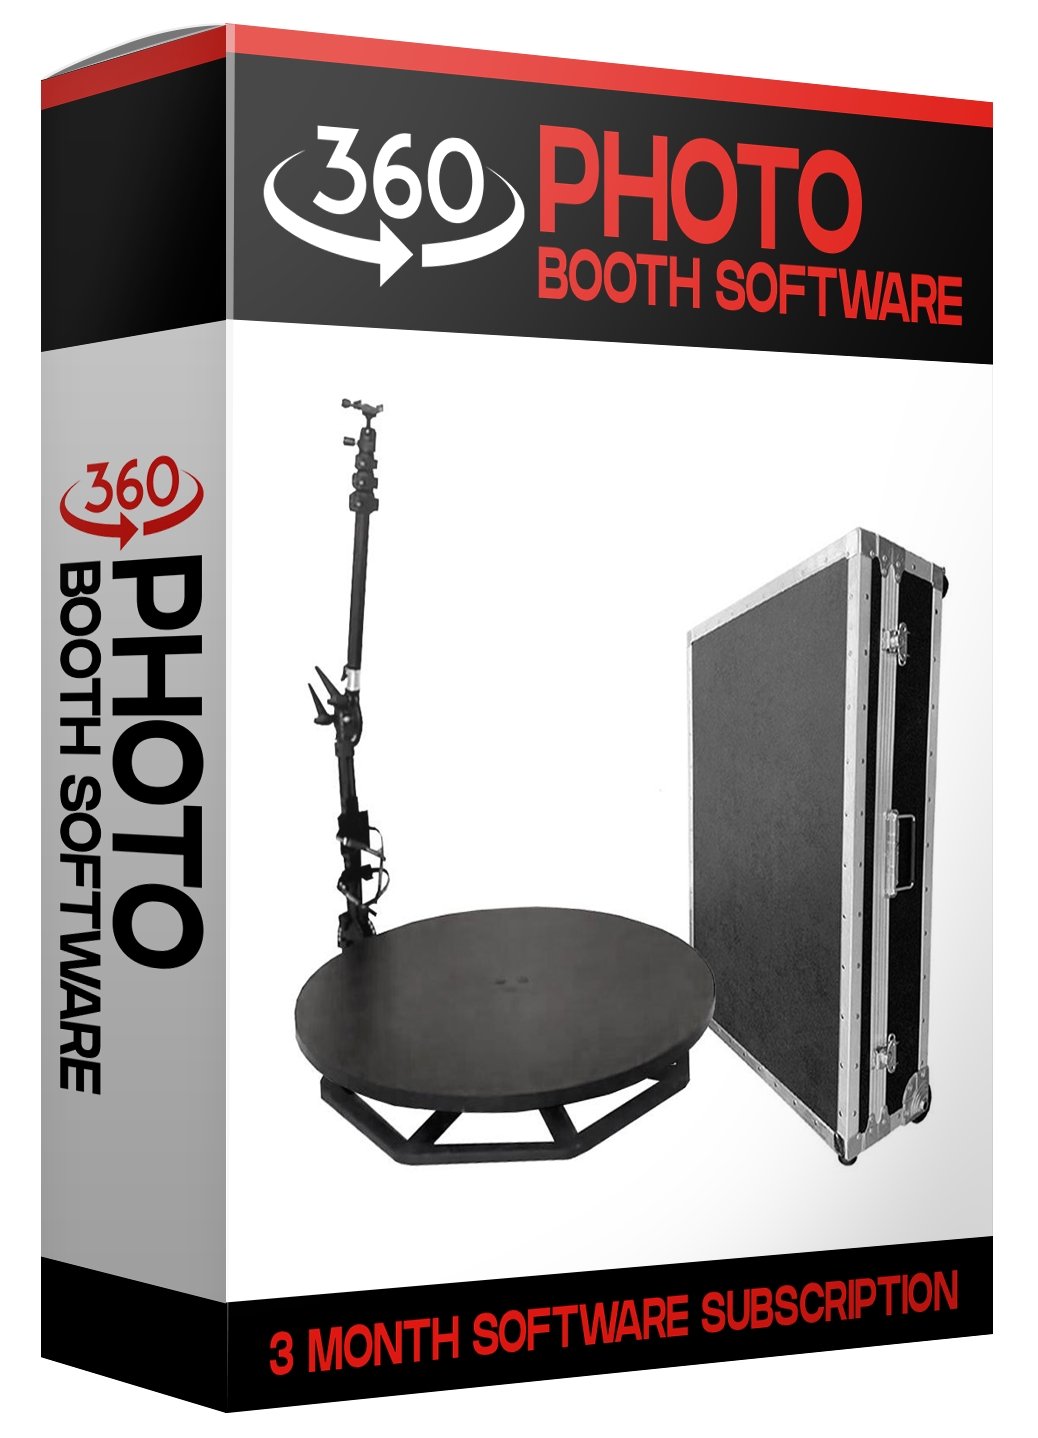 REVOSPIN OA-6 OCTAGON 35” AUTOMATIC 360 BOOTH DELUXE BUNDLE - VS Booths 360